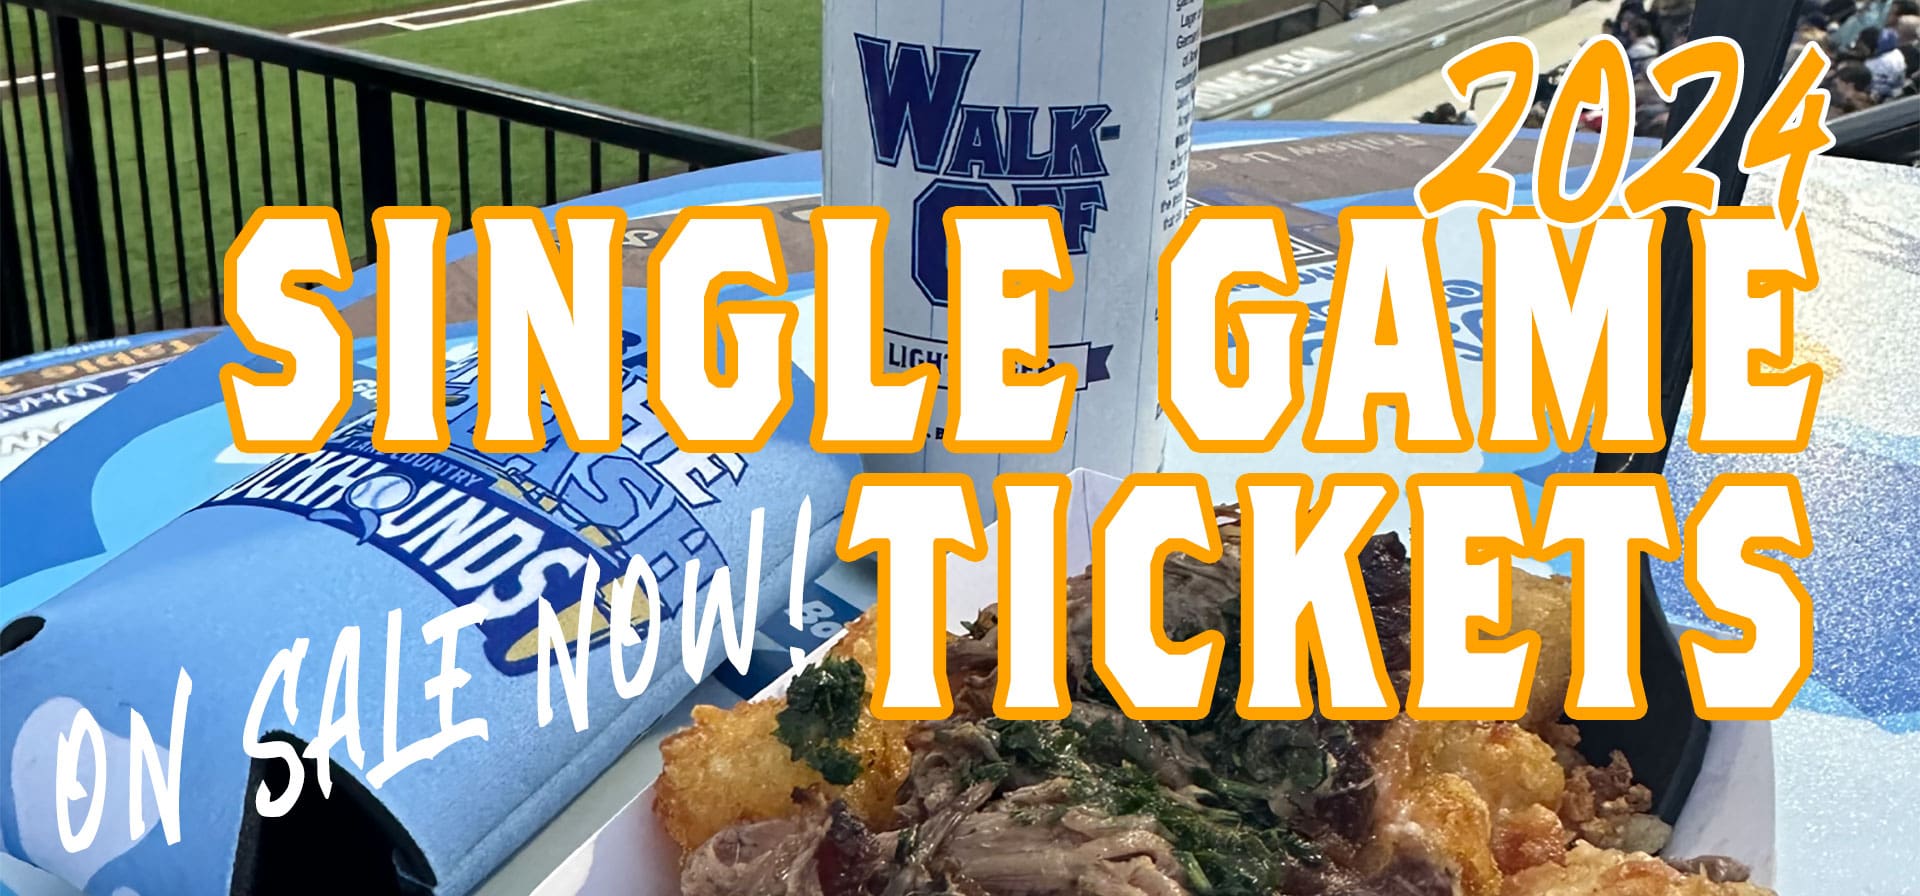 Single Game Tickets on sale now